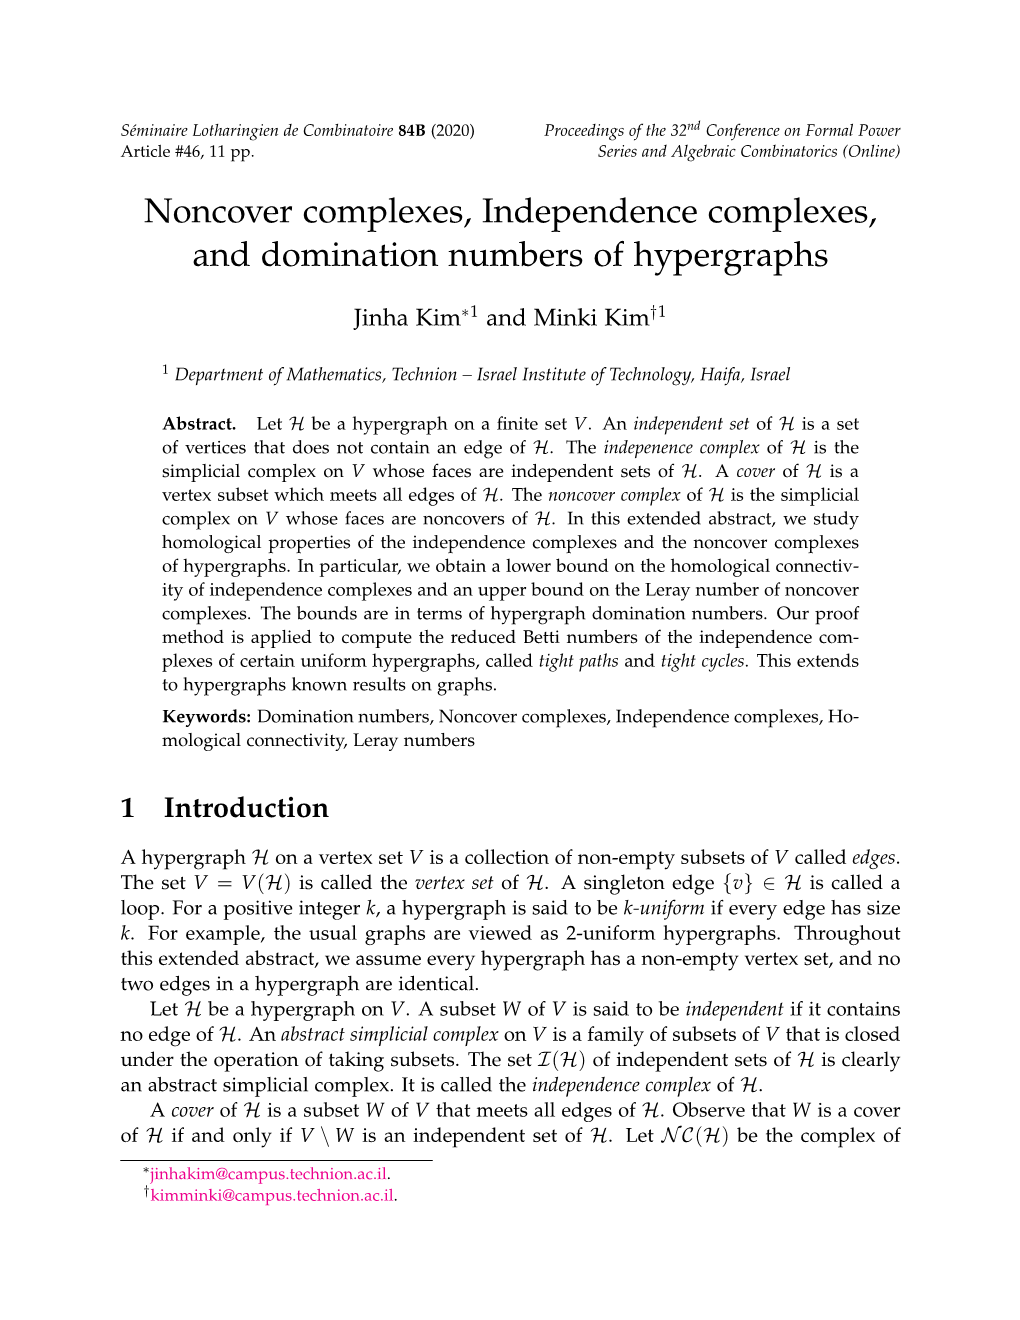 Noncover Complexes, Independence Complexes, and Domination Numbers of Hypergraphs